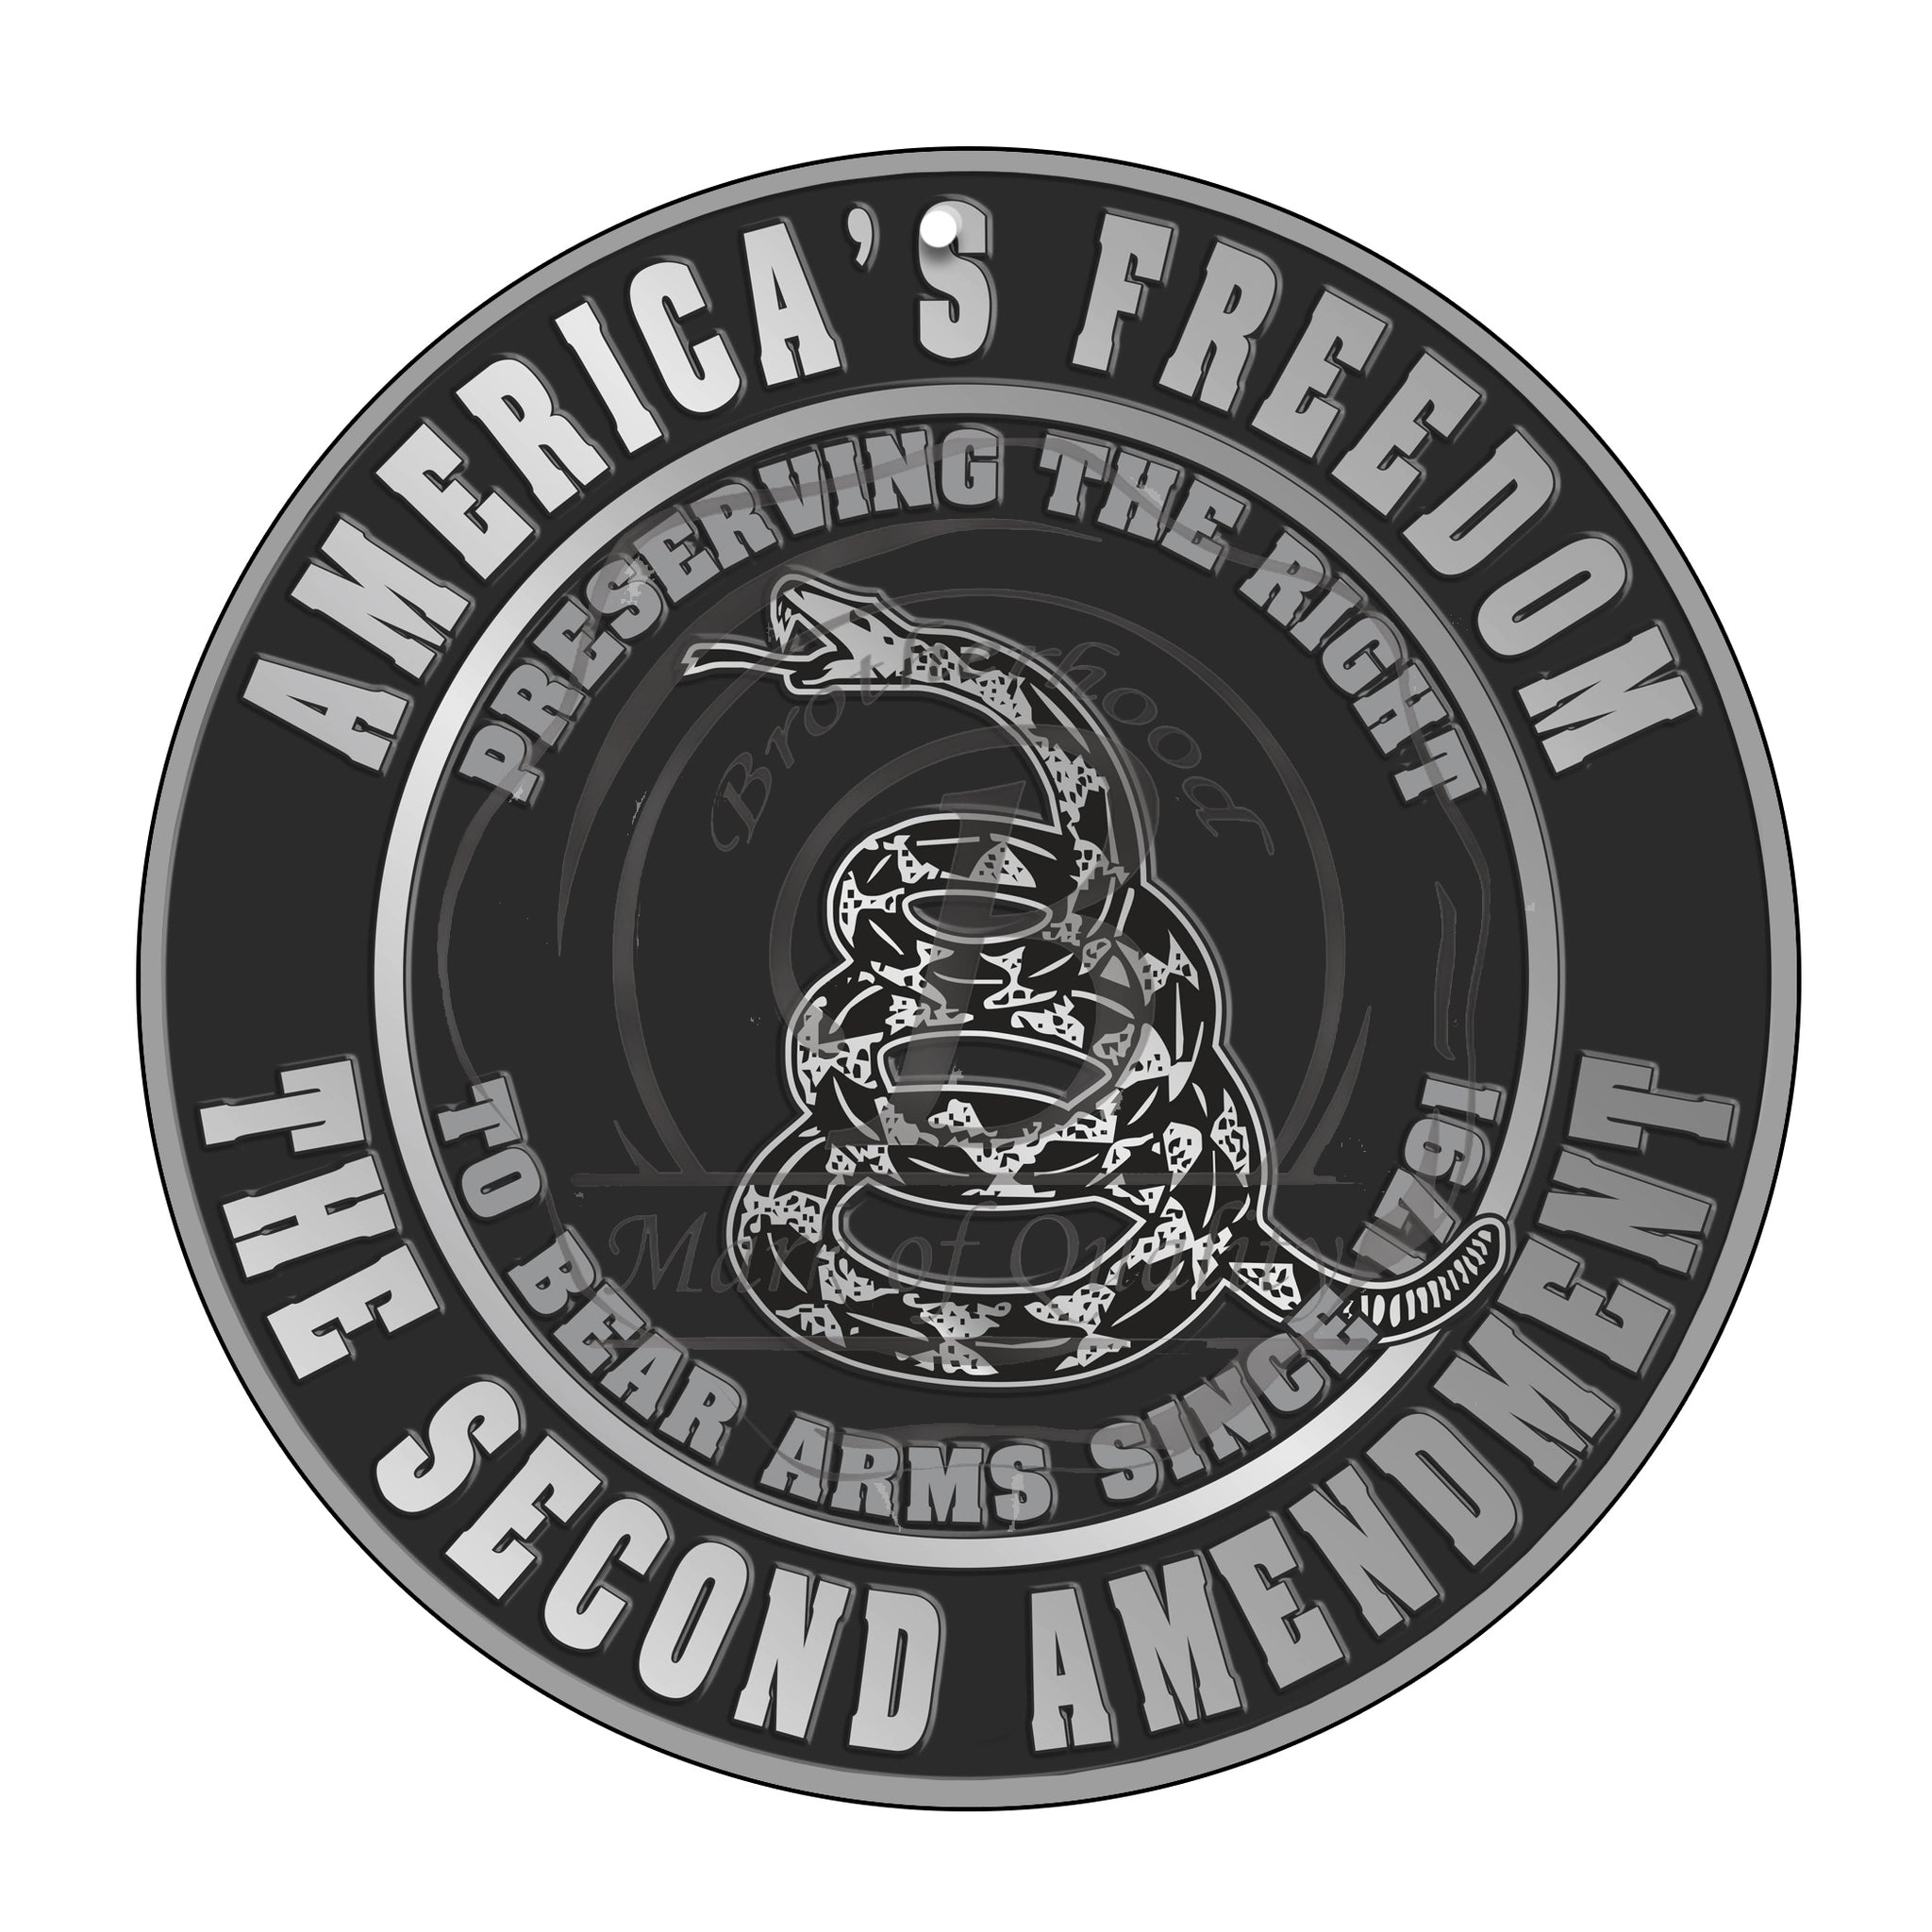 America's Freedom Preserving the Right To Bear Arms 11.75" Aluminum Circle Sign